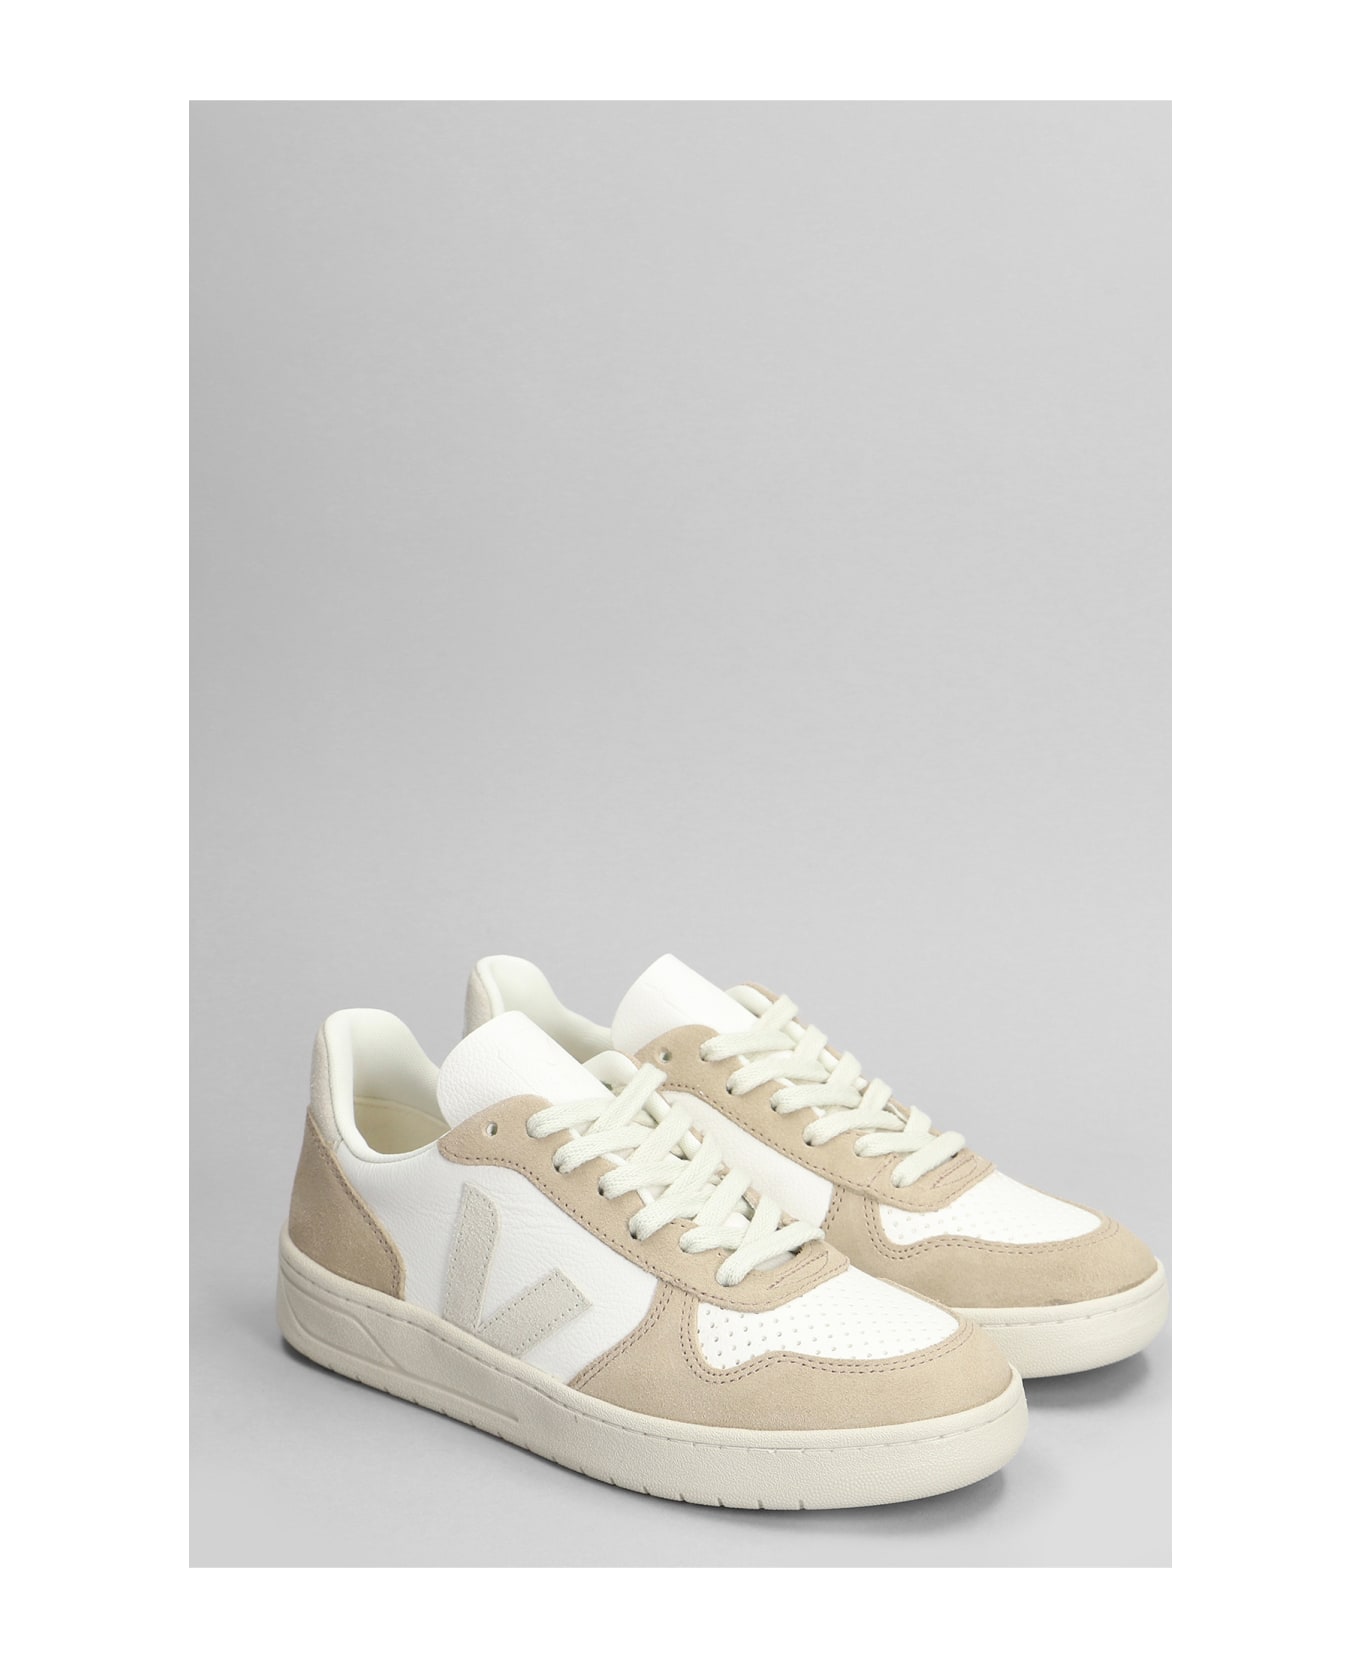 Veja V-10 Sneakers In White Suede And Leather - white